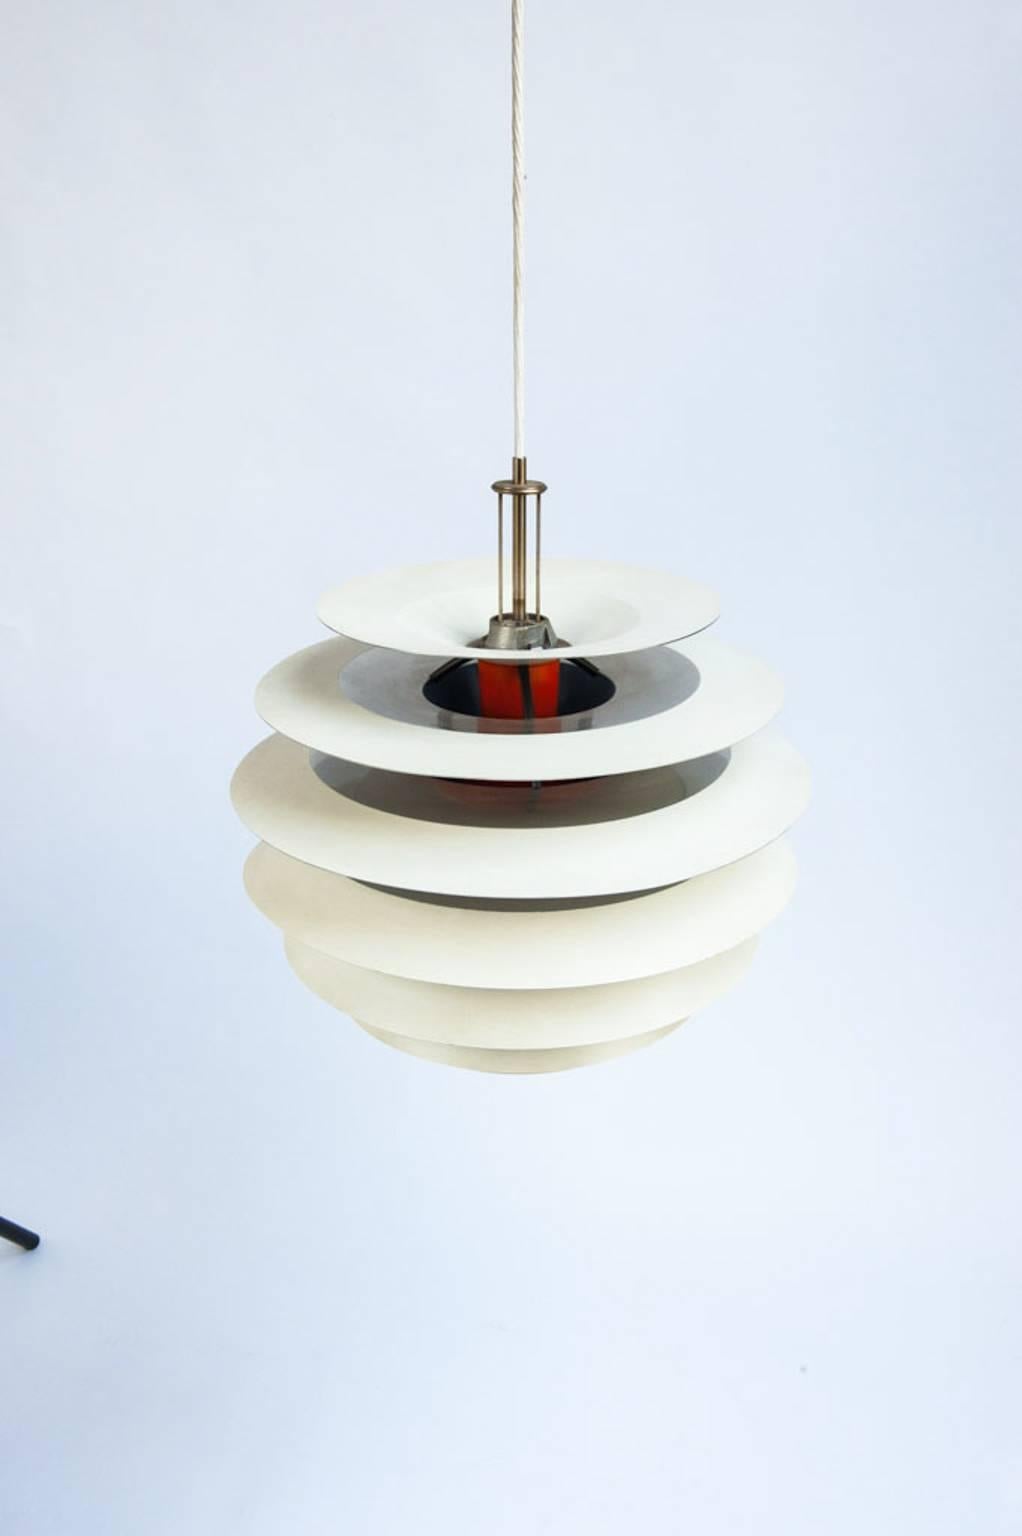 The beautiful contrast ceiling lamp was designed by Poul Henningsen and manufactured by Louis Poulsen during the 1960s in Denmark. The lamp features a white and orange lacquered metal structure with chrome details and black lacquered brass fittings.